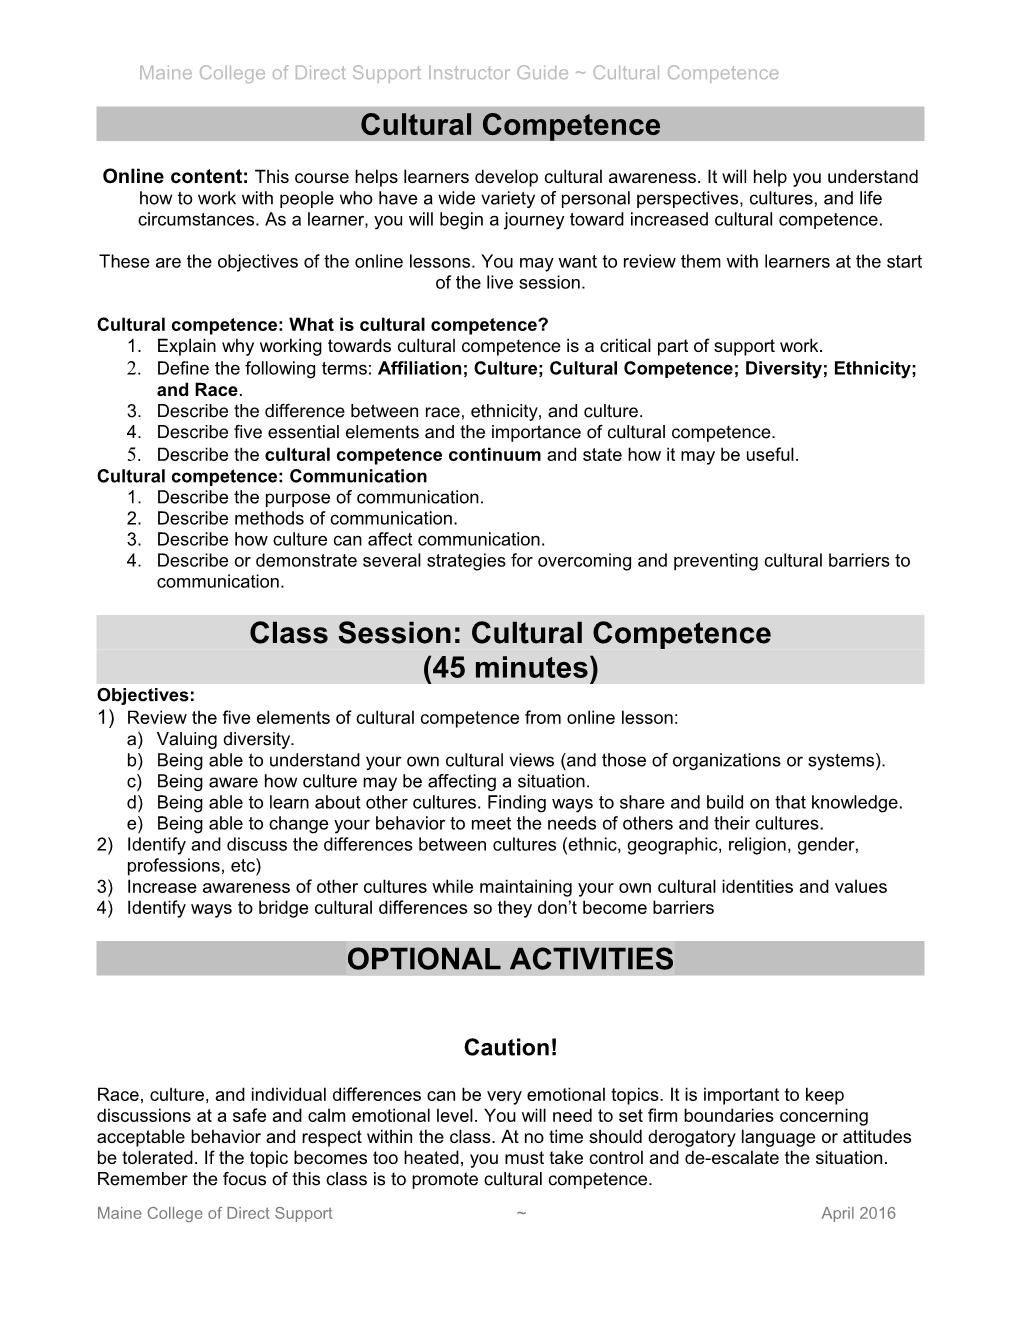 Maine College of Direct Support Instructor Guide Cultural Competence